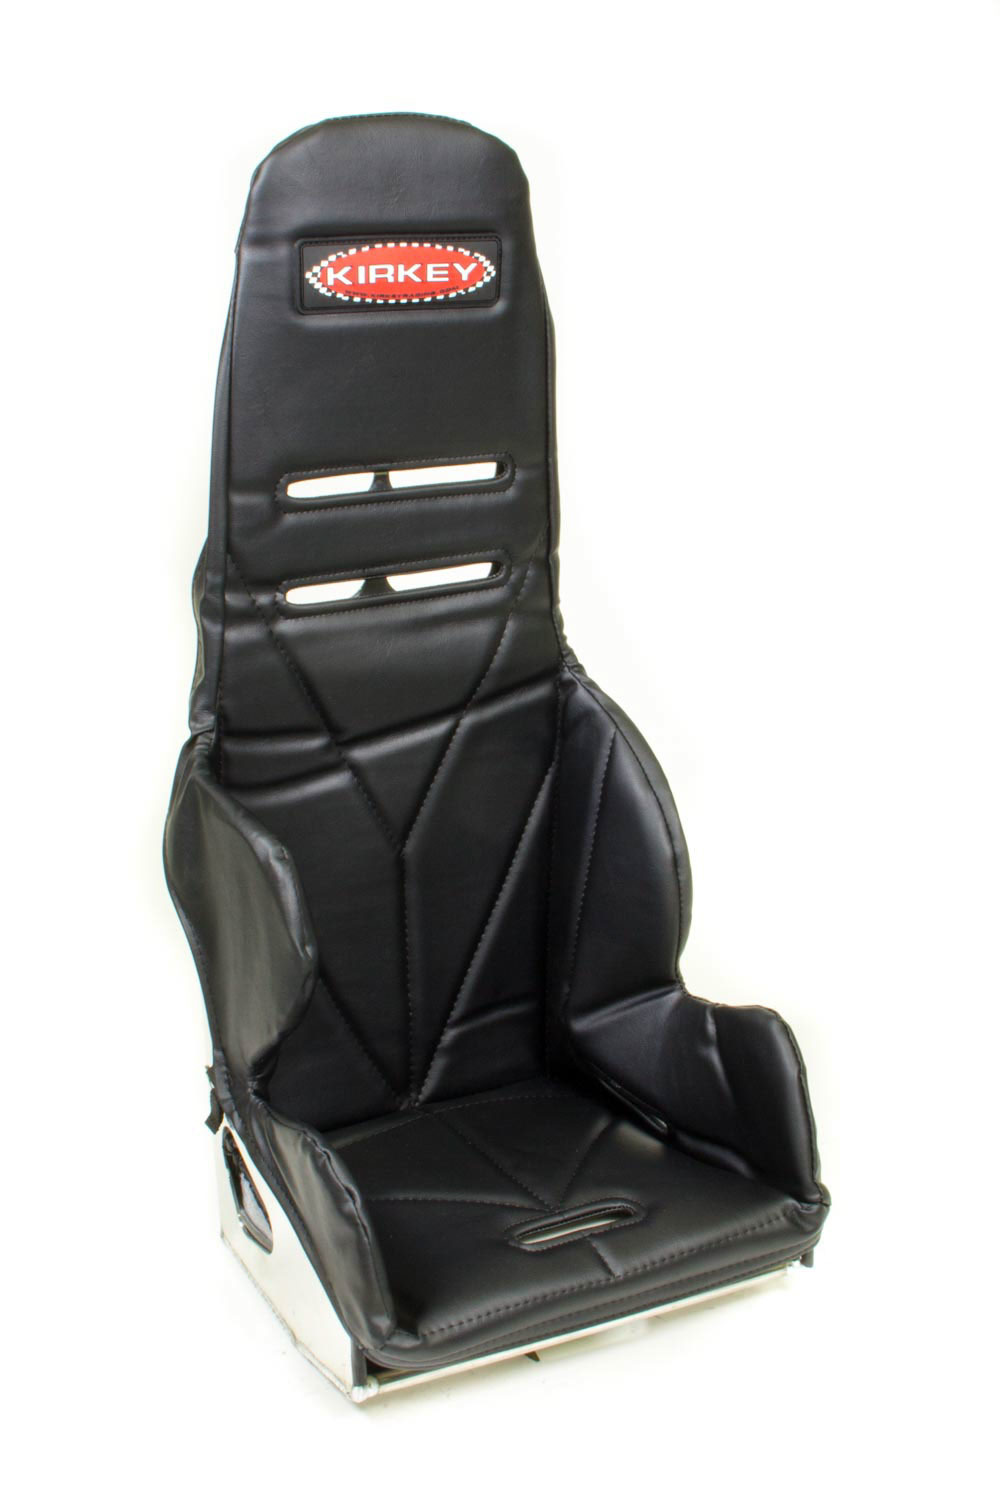 Kirkey Racing Seats 24901 Seat Cover, Snap Attachment, Vinyl, Black, Kirkey 24 Series Child, 10 in Wide Seat, Each